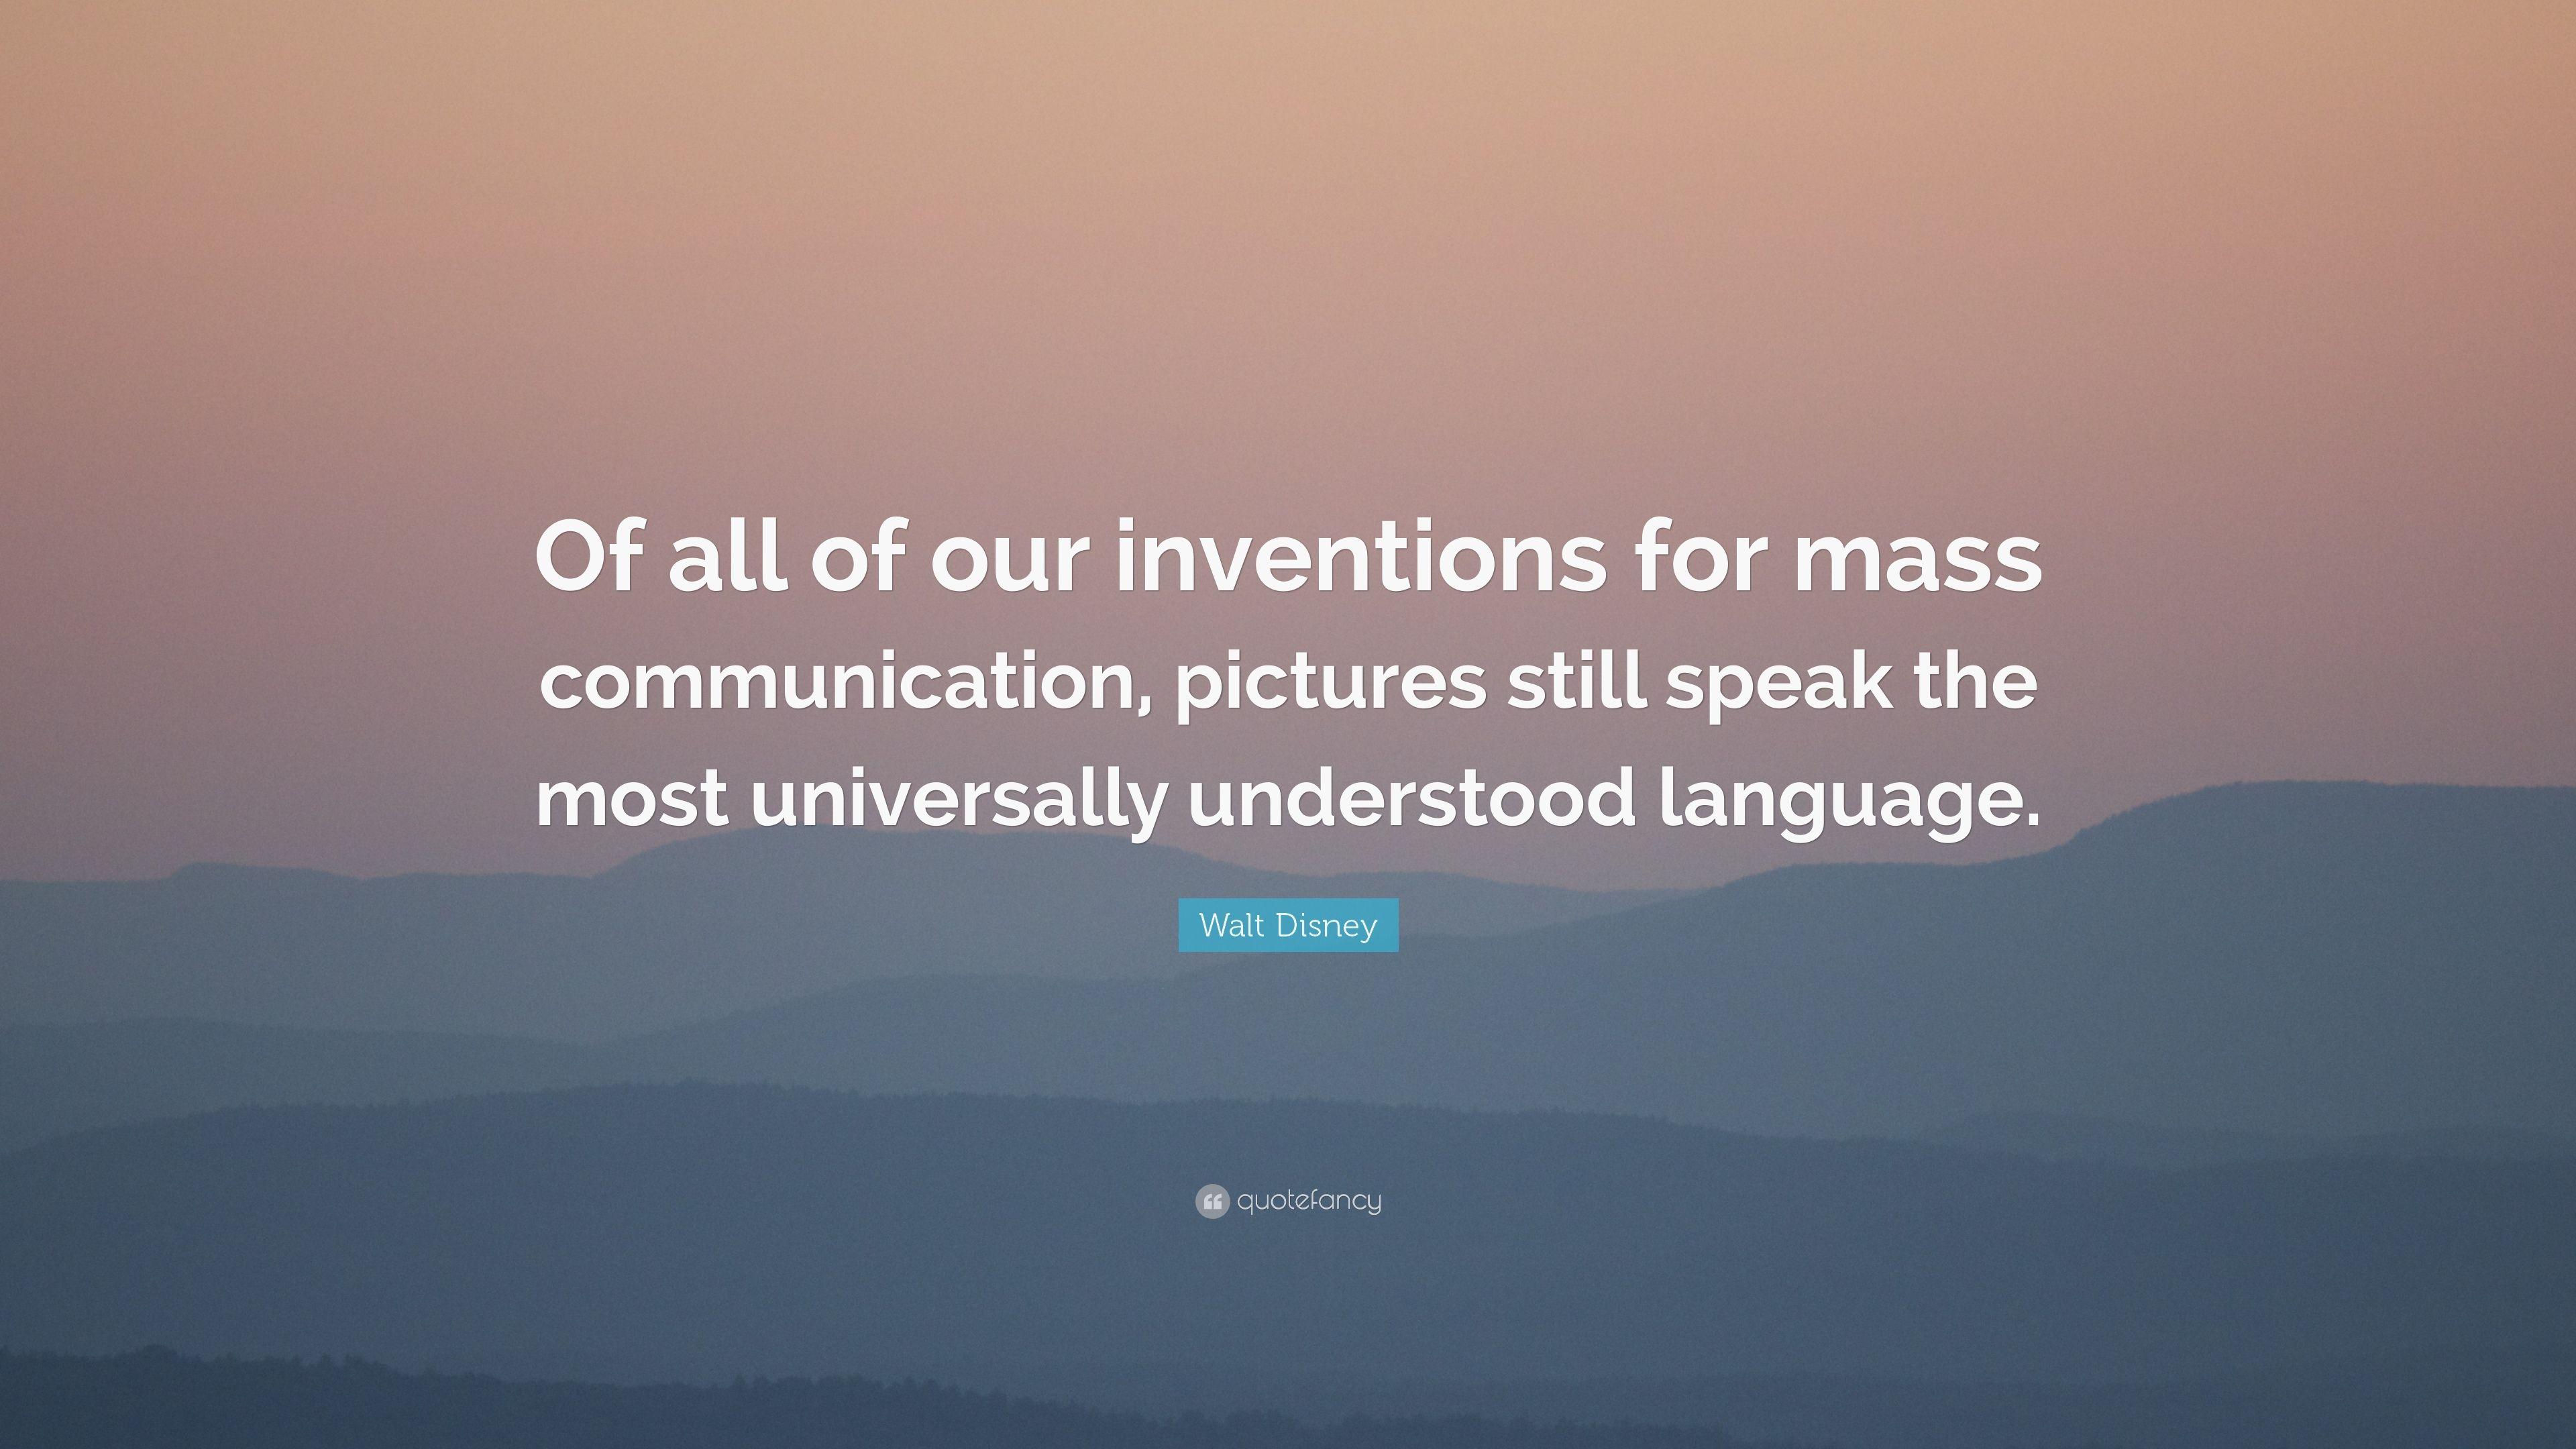 Walt Disney Quote: “Of all of our inventions for mass